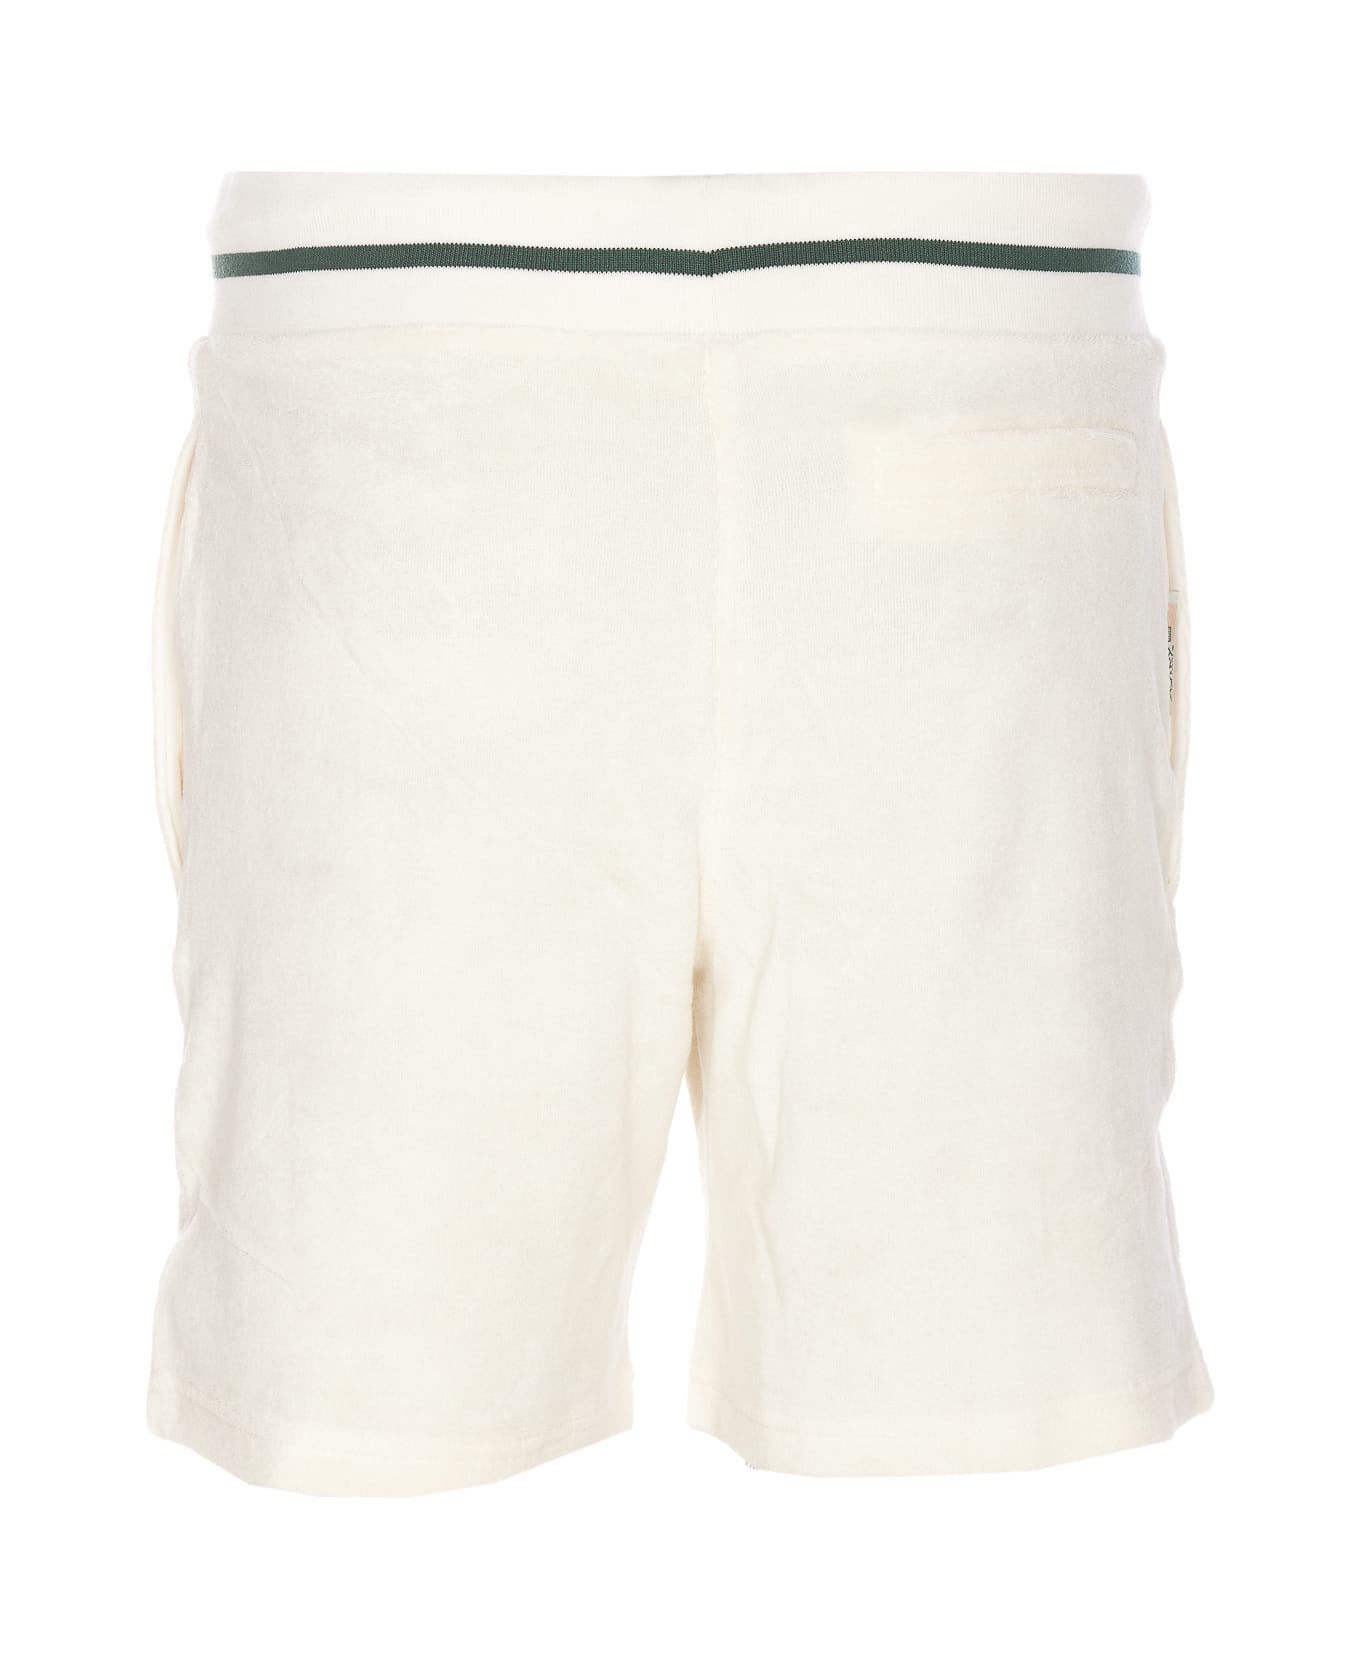 Autry White Bermuda Shorts With Drawstring And Staple X Logo Detail In Jersey Man - White ショートパンツ